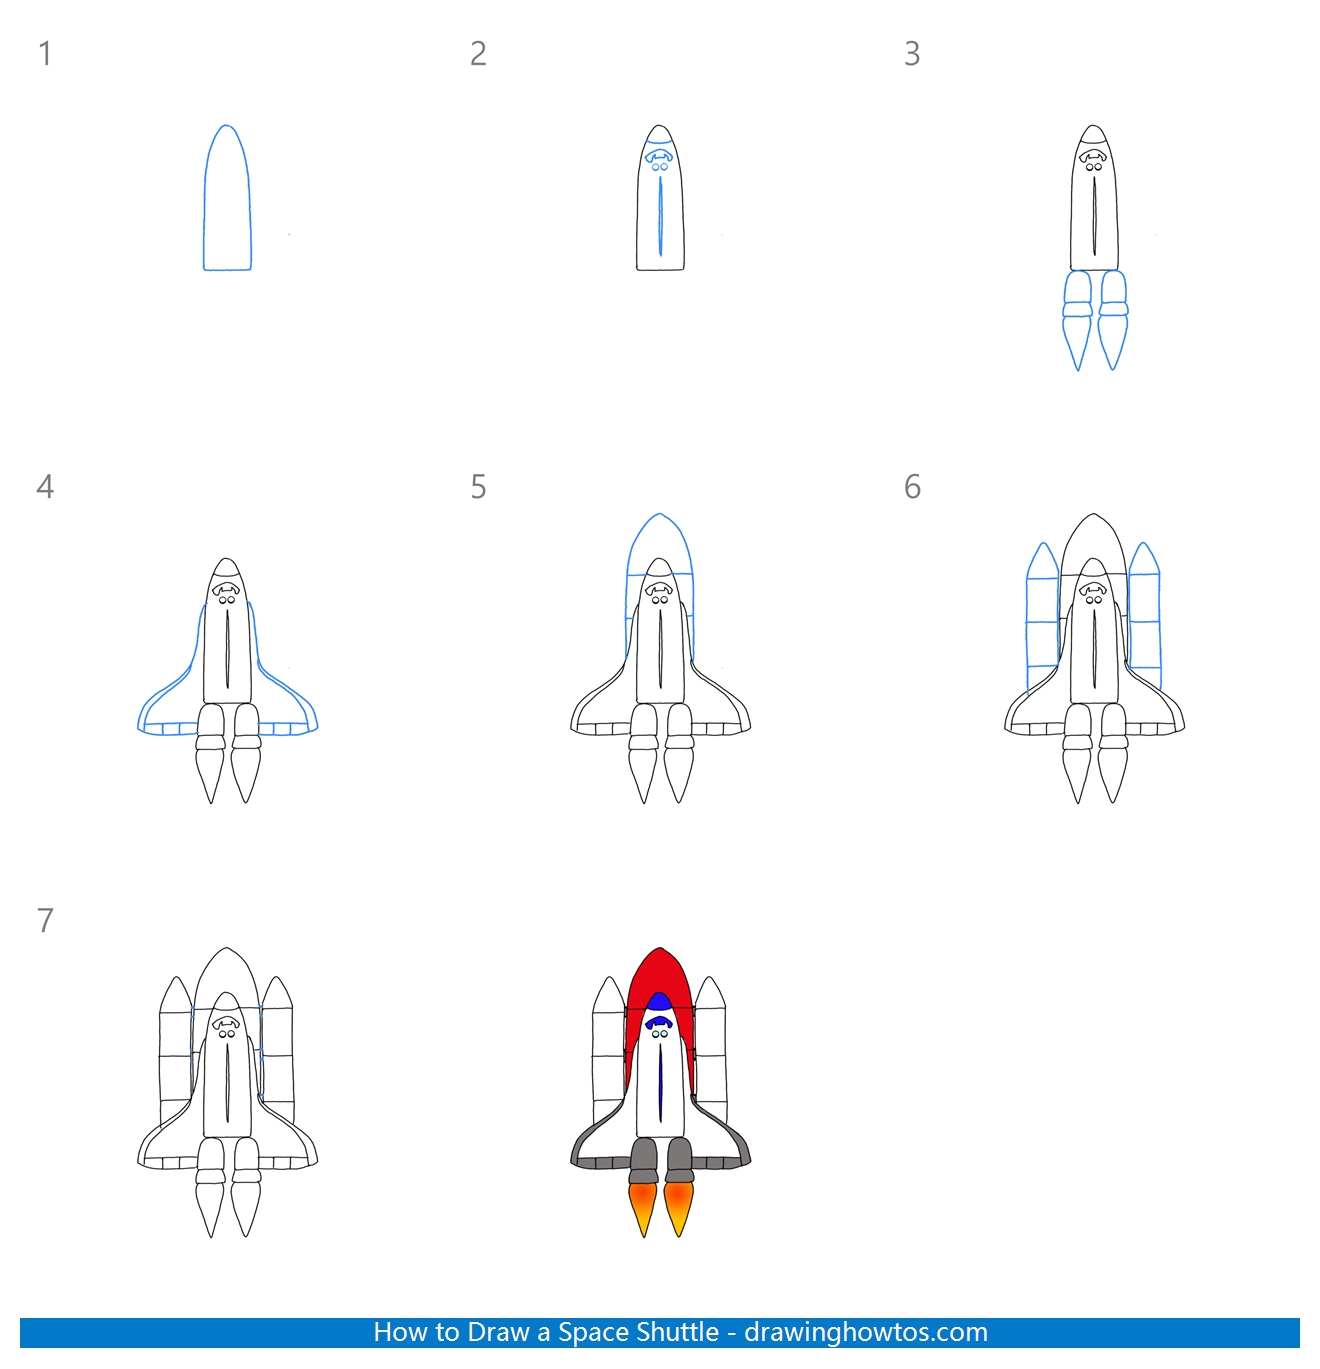 How to Draw a Space Shuttle Step by Step